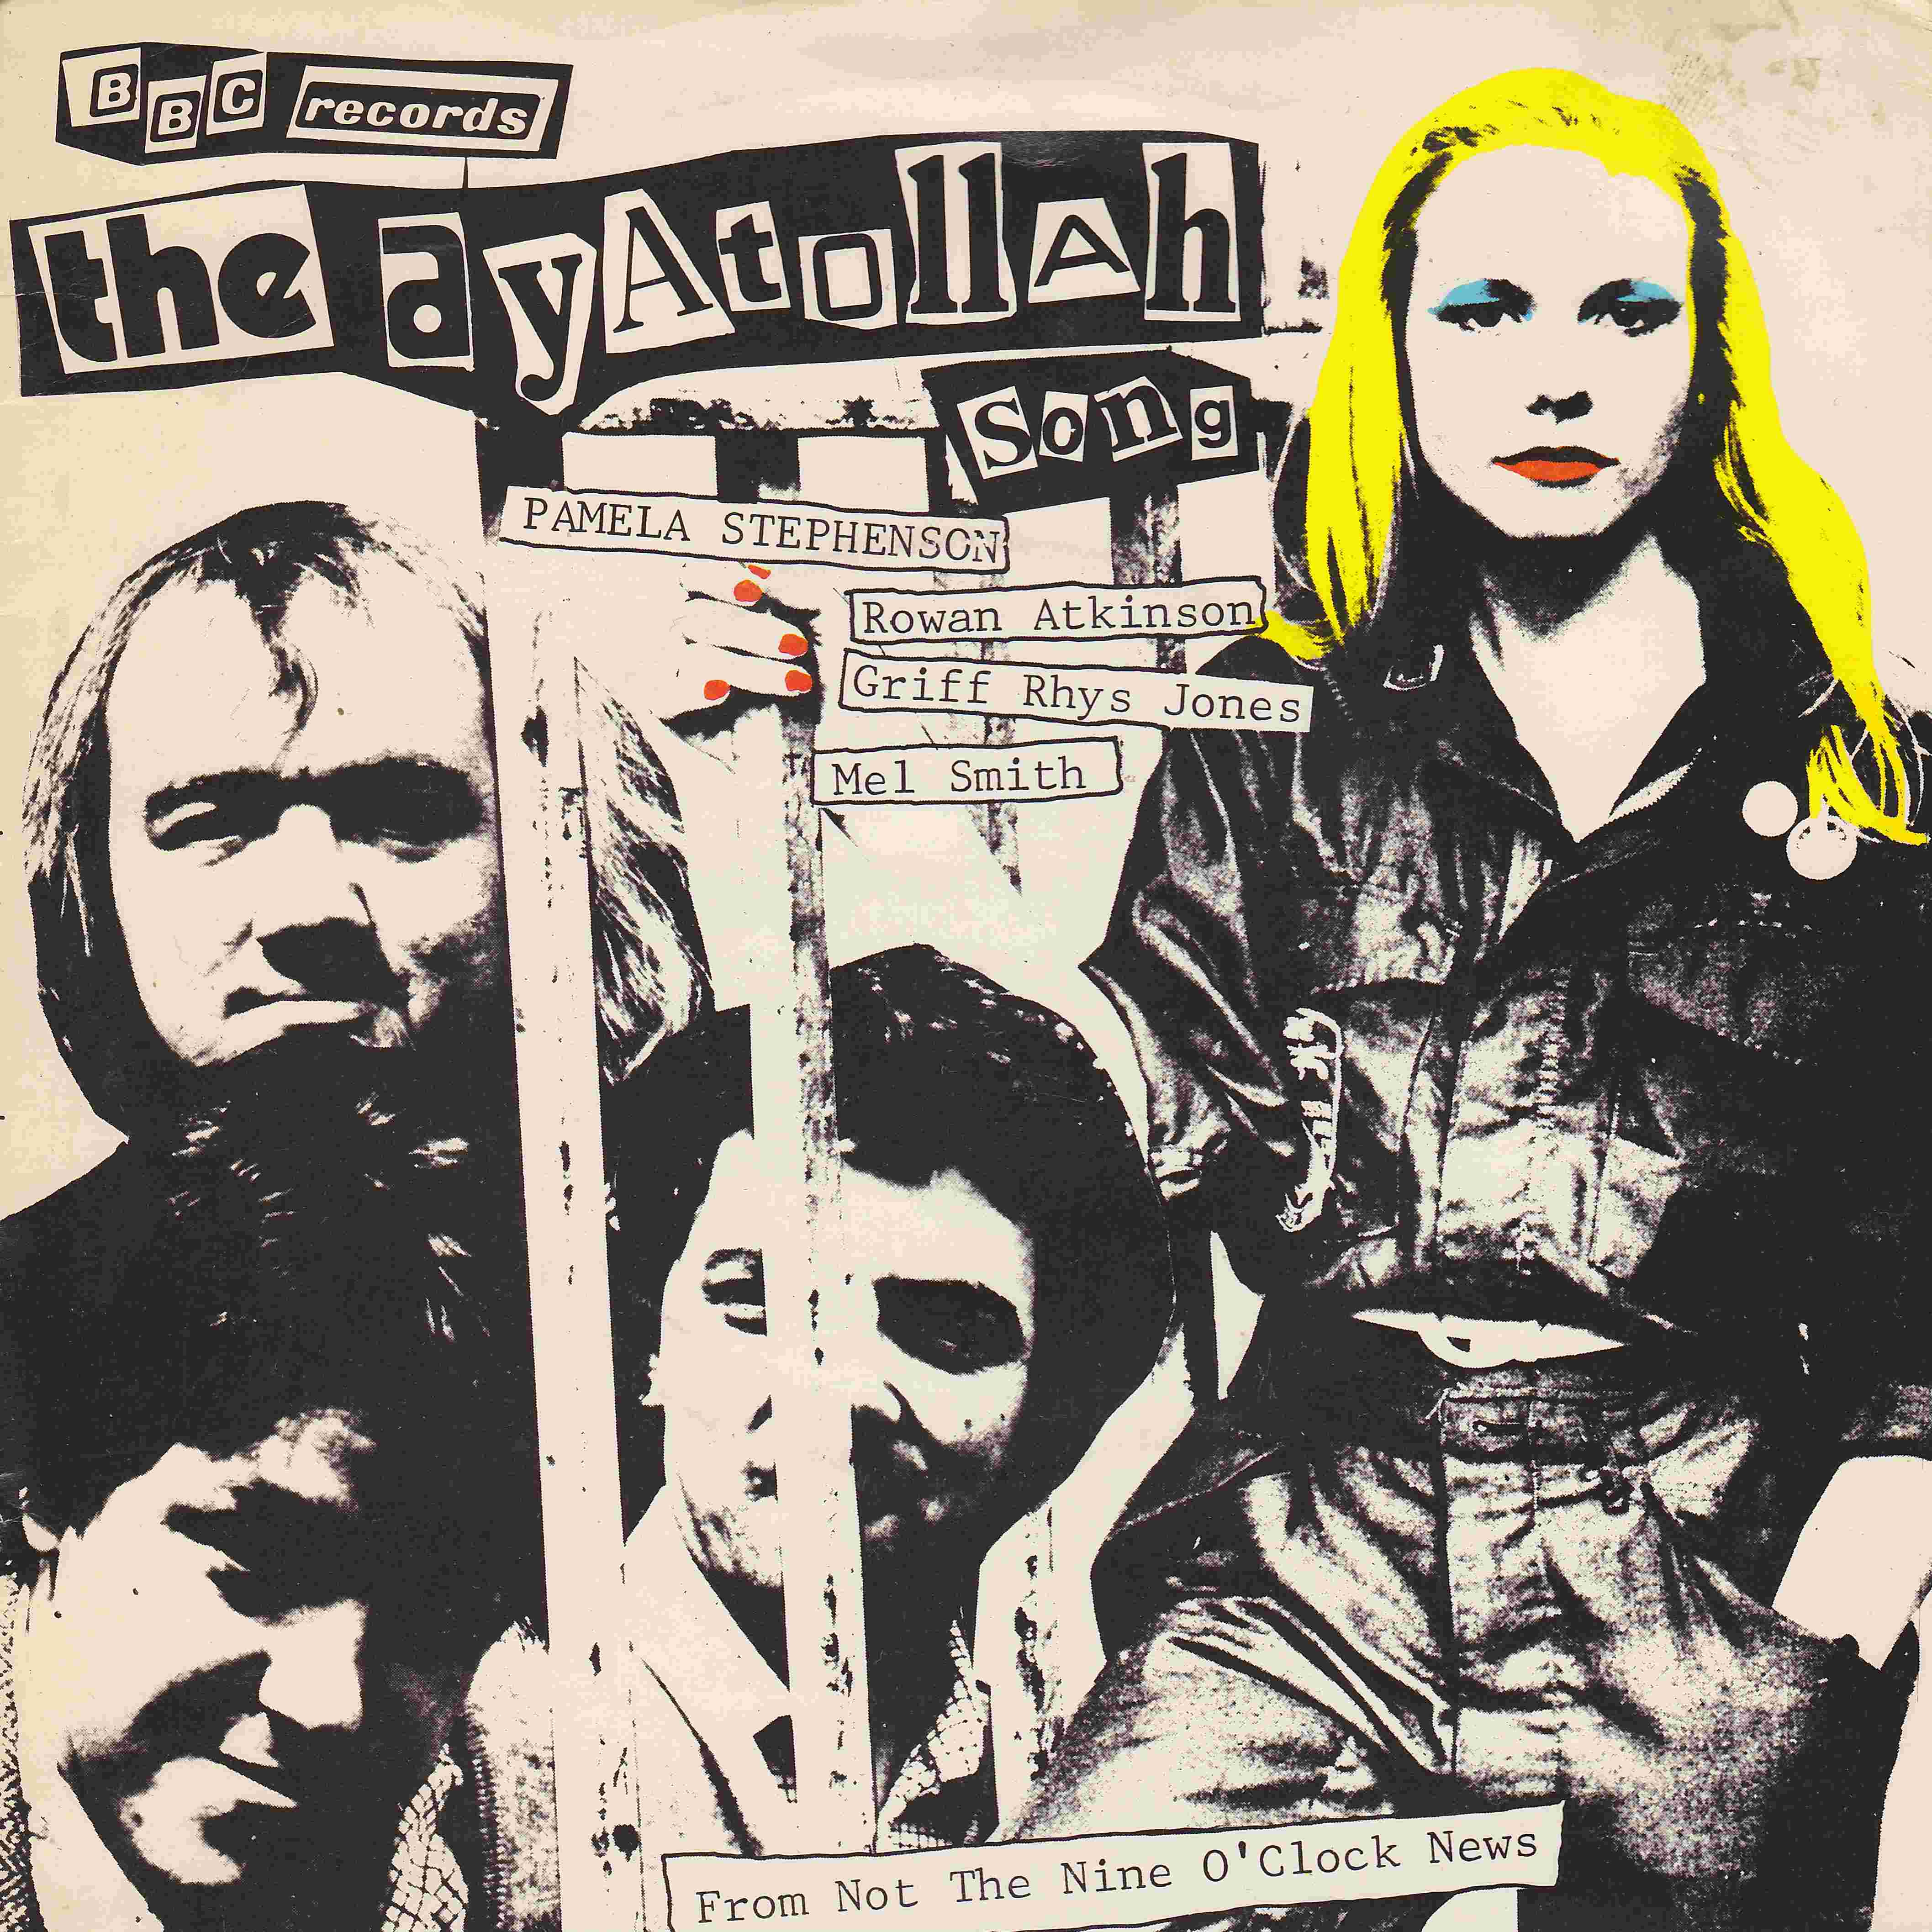 Picture of RESL 88 The Ayatollah song (Not the nine o'clock news) by artist Curtis / Goodall / Smith from the BBC singles - Records and Tapes library